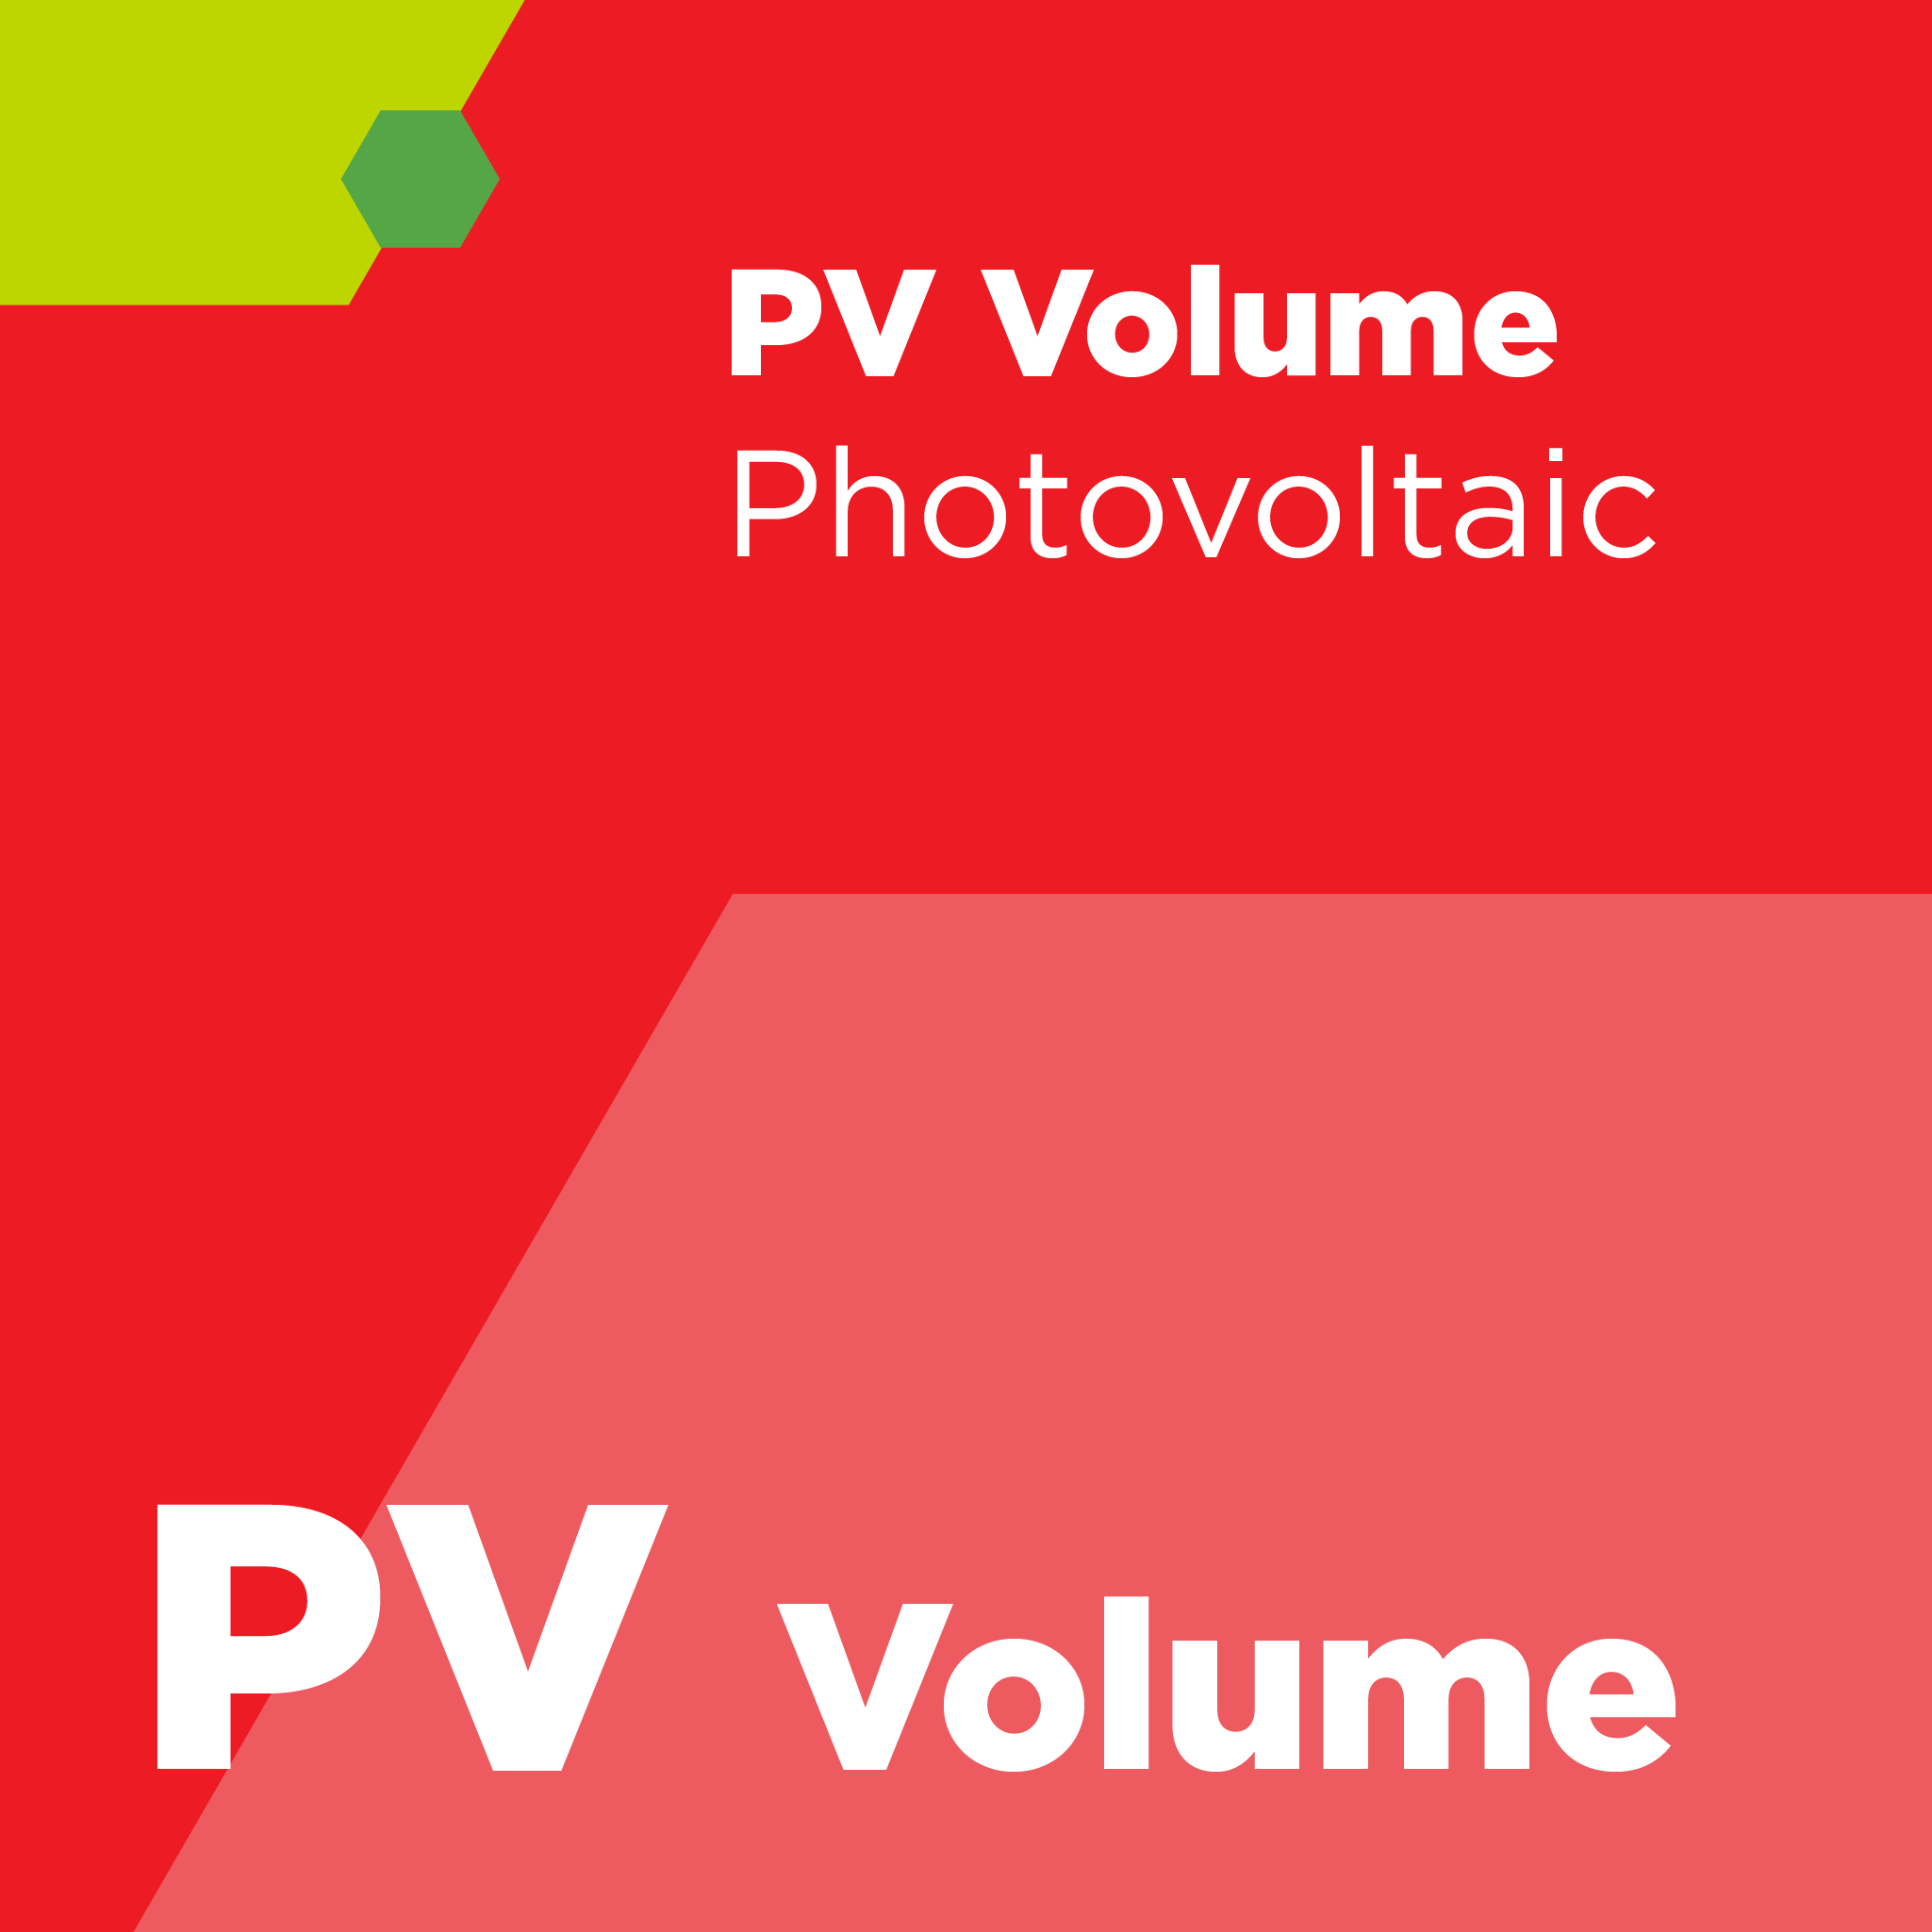 PV01100 - SEMI PV11 - Specification for Hydrofluoric Acid, Used in Photovoltaic Applications